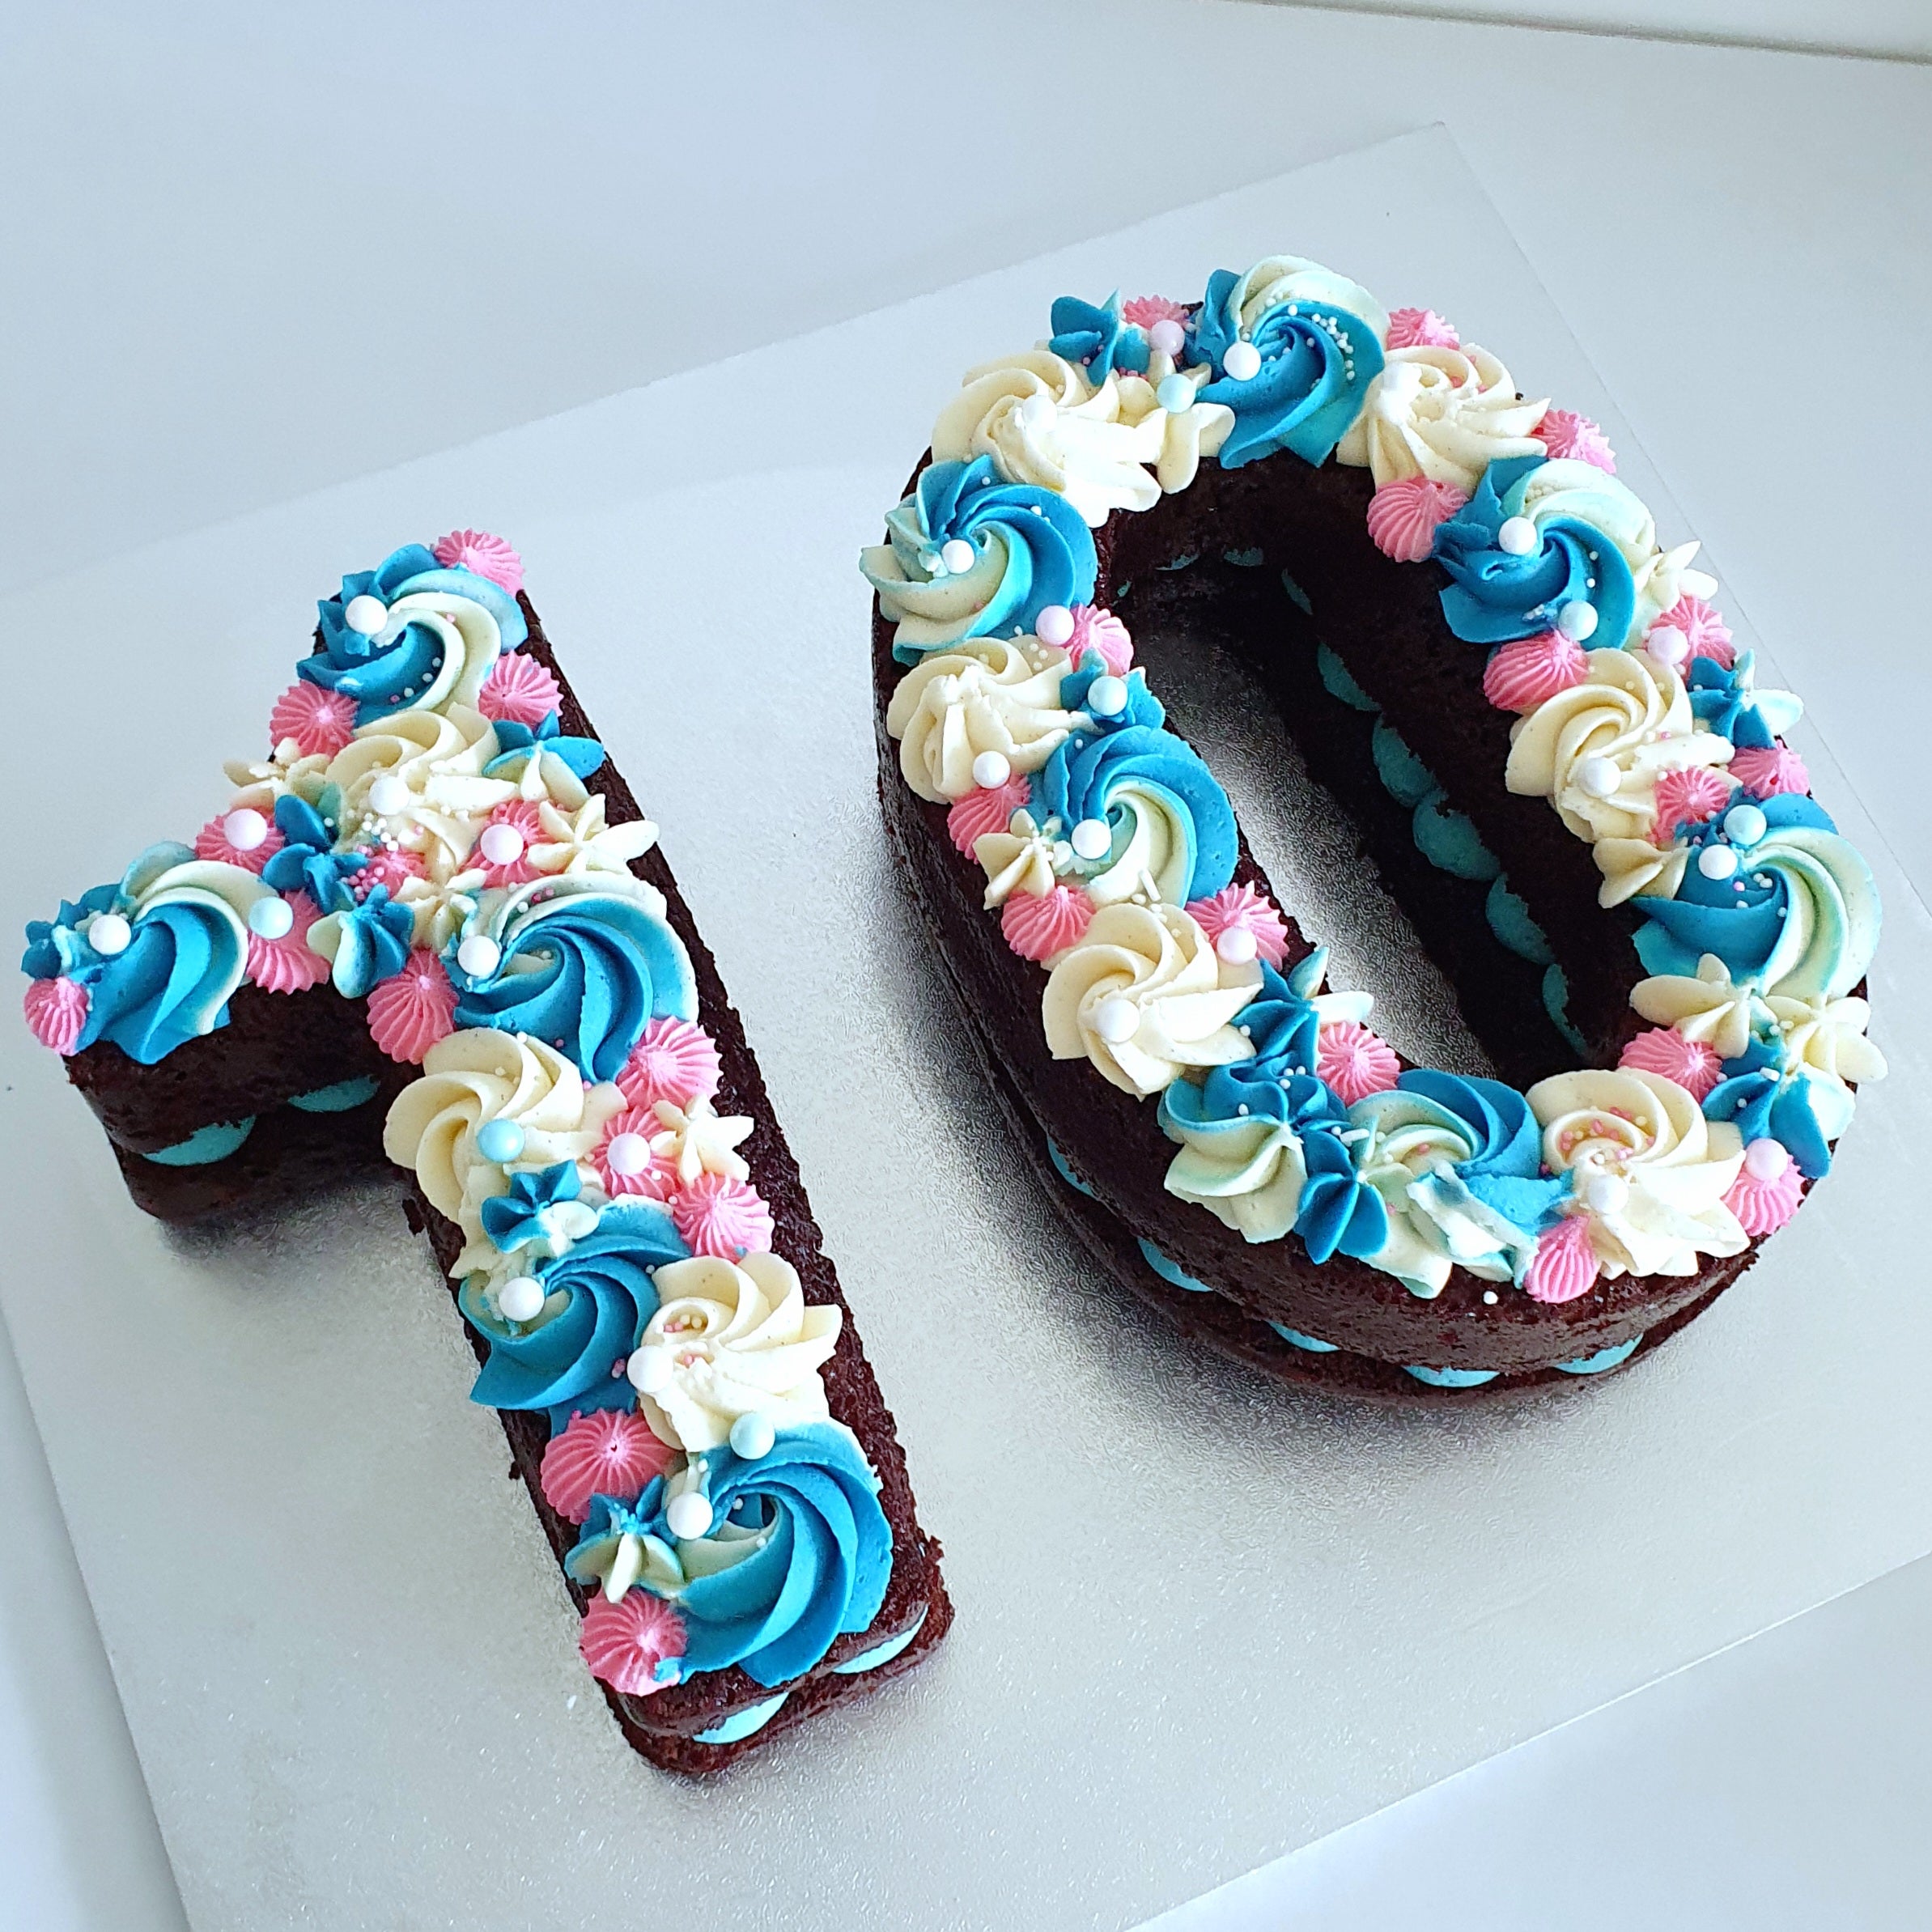 Celebrate: 10 best kids' birthday cakes | The Independent | The Independent